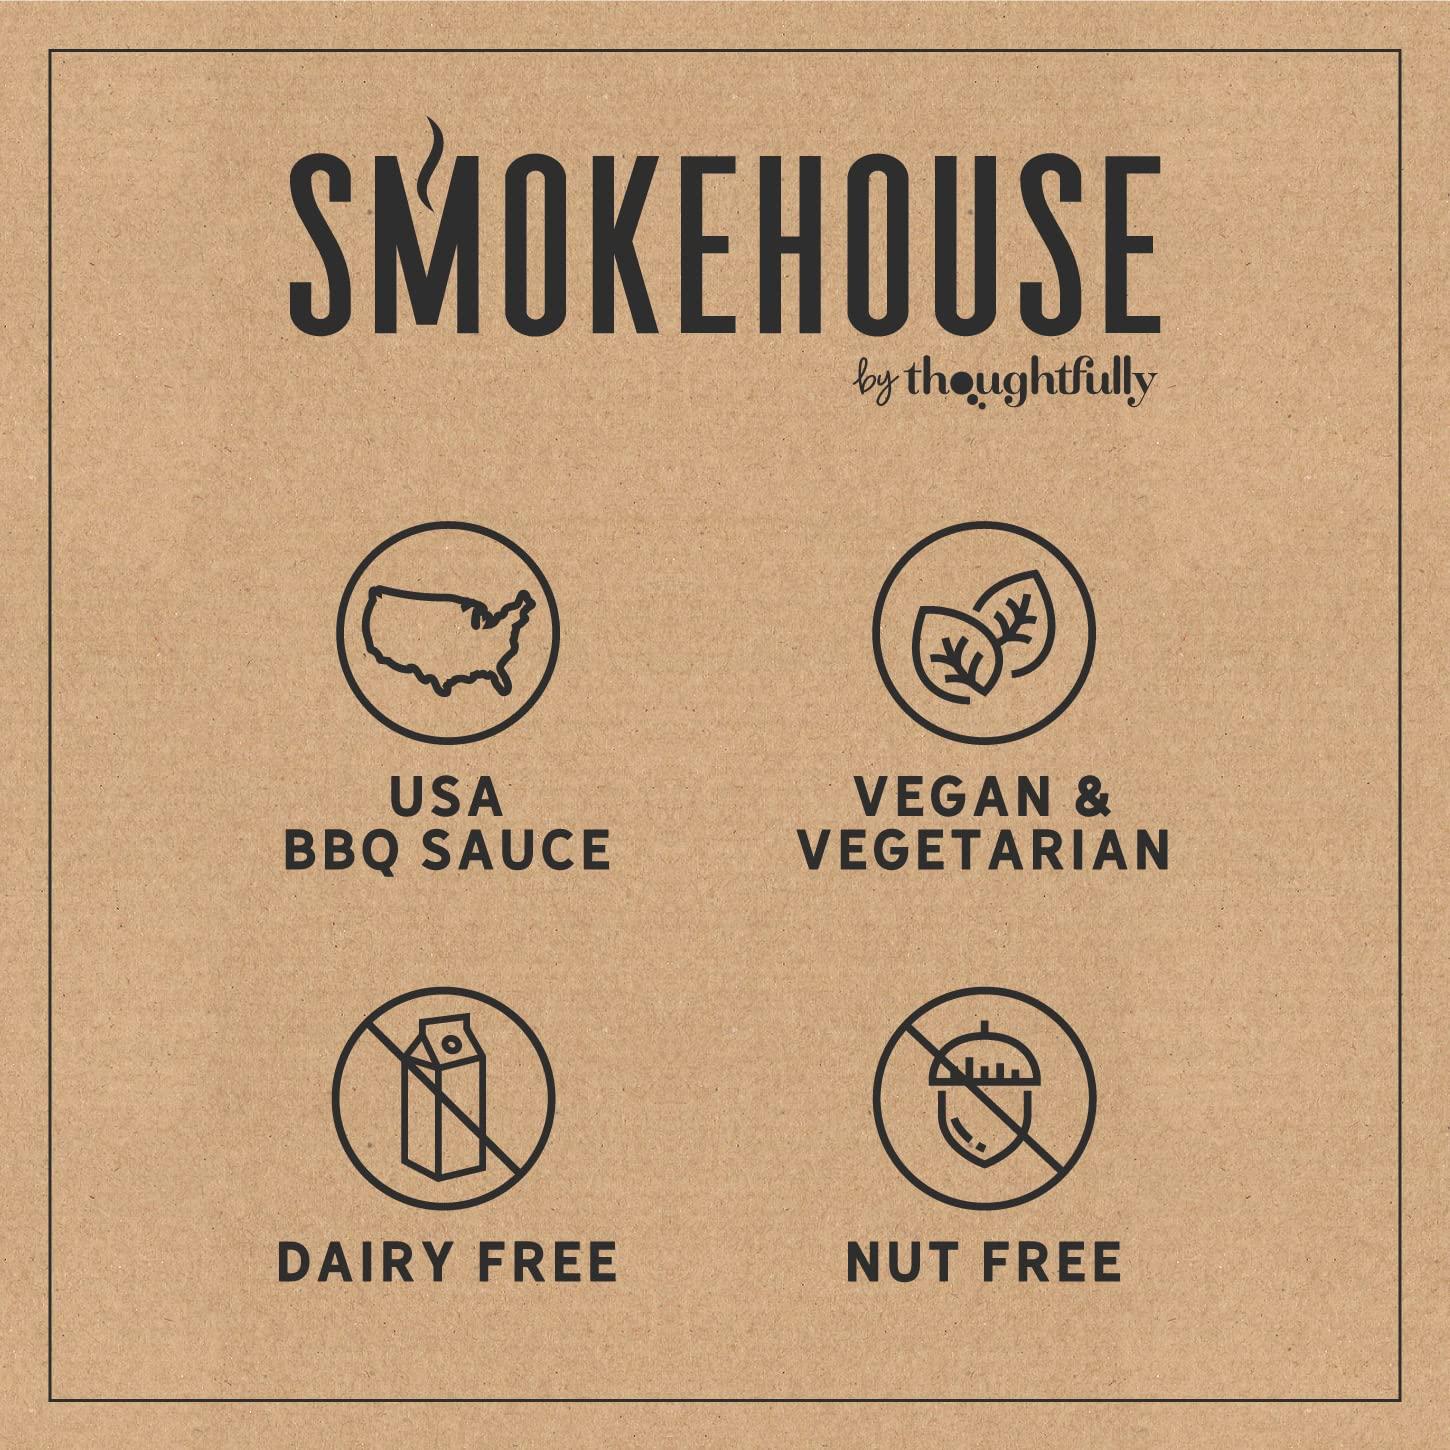 Smokehouse by Thoughtfully, BBQ Grilling Case and Rubs Gift Set, Set of 18